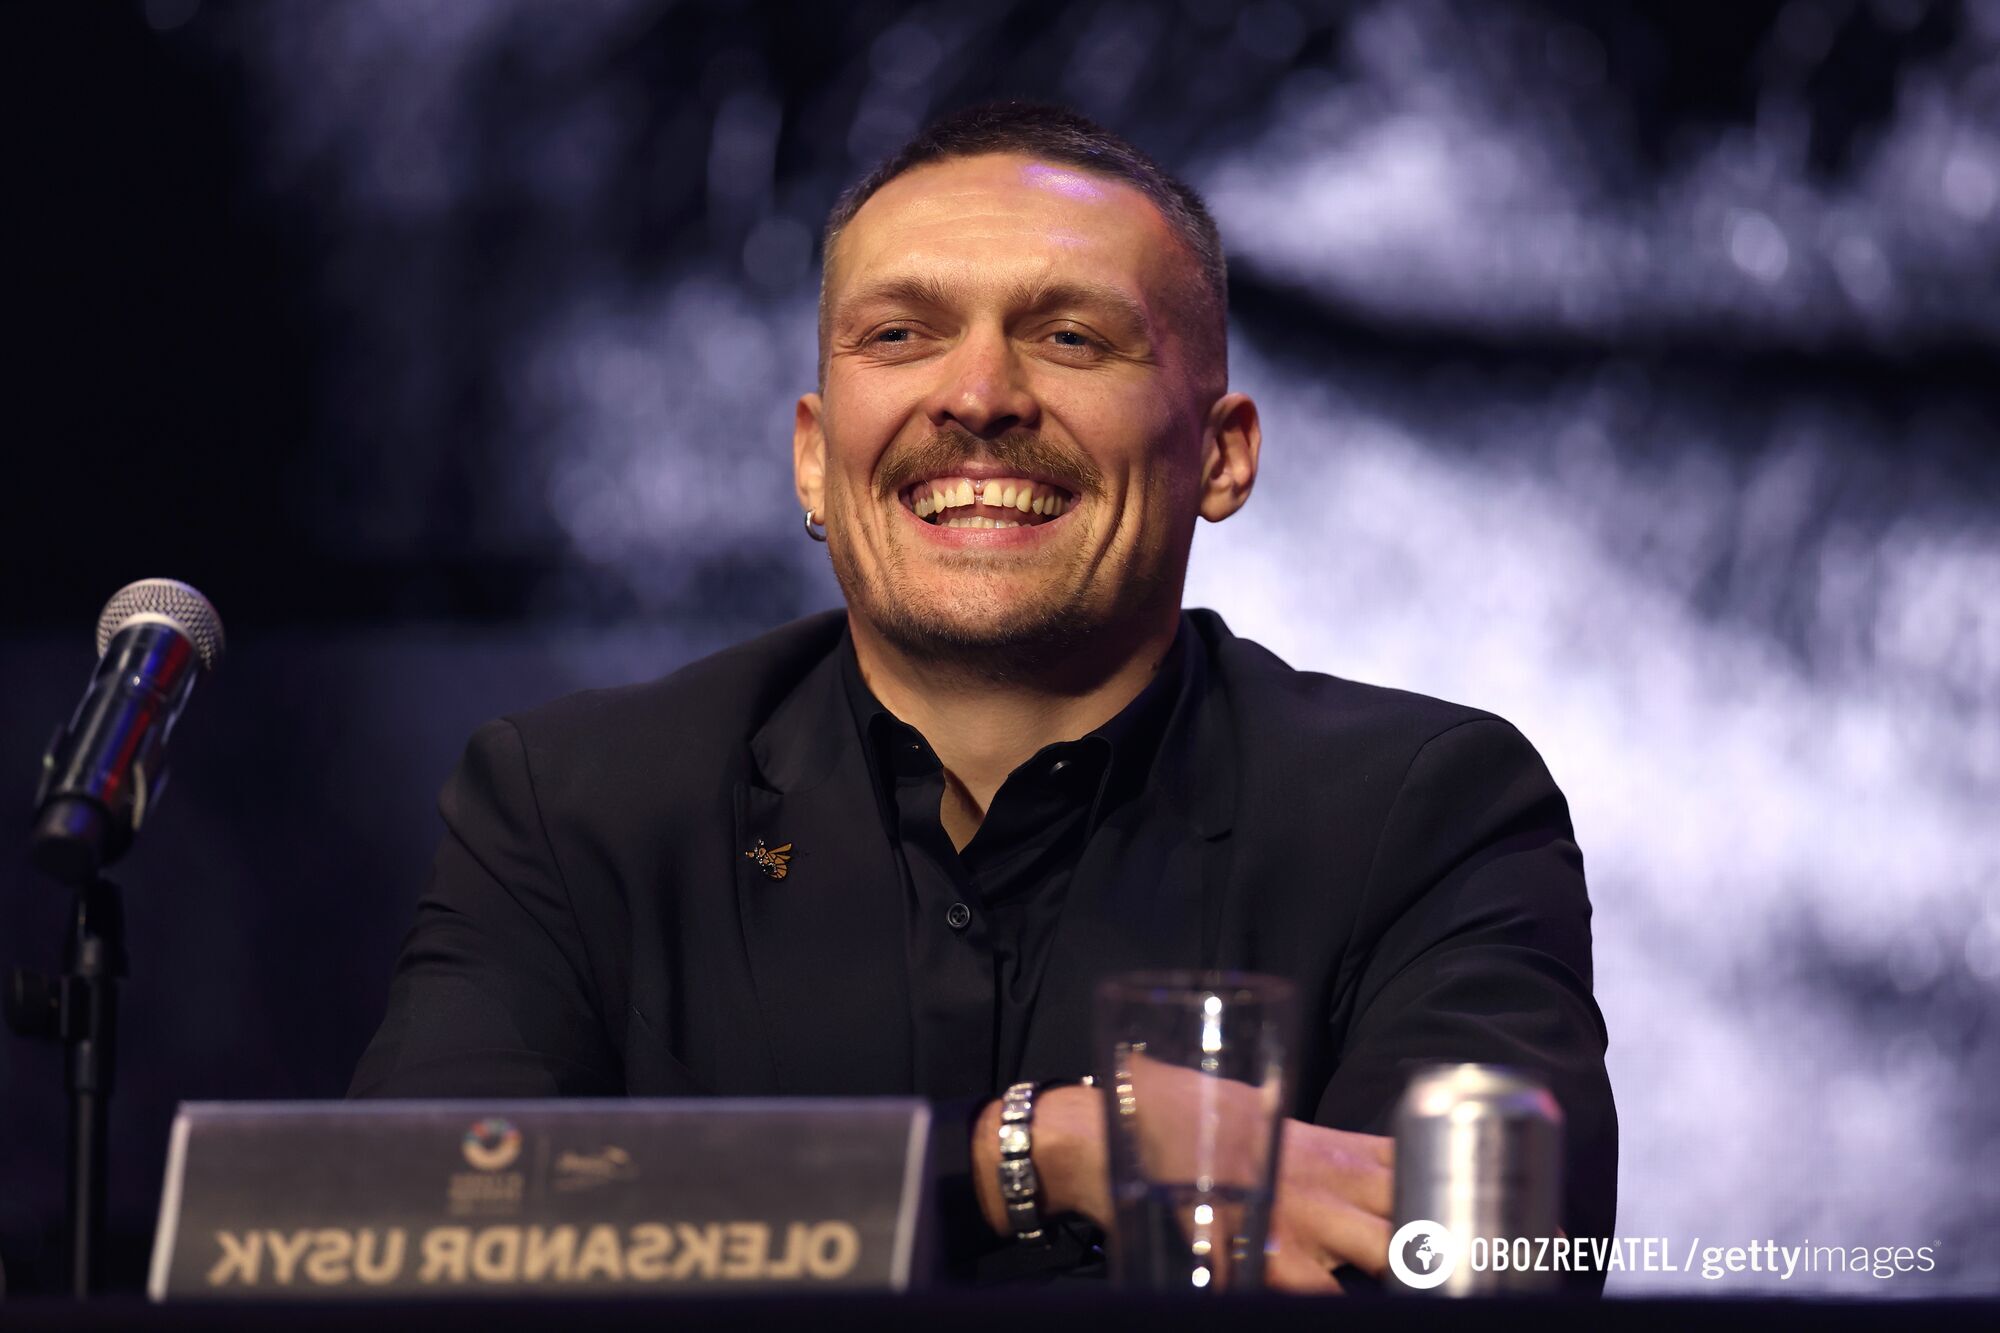 Russian world champion answers questions about his insult to Usyk and accuses Ukrainian of cowardice